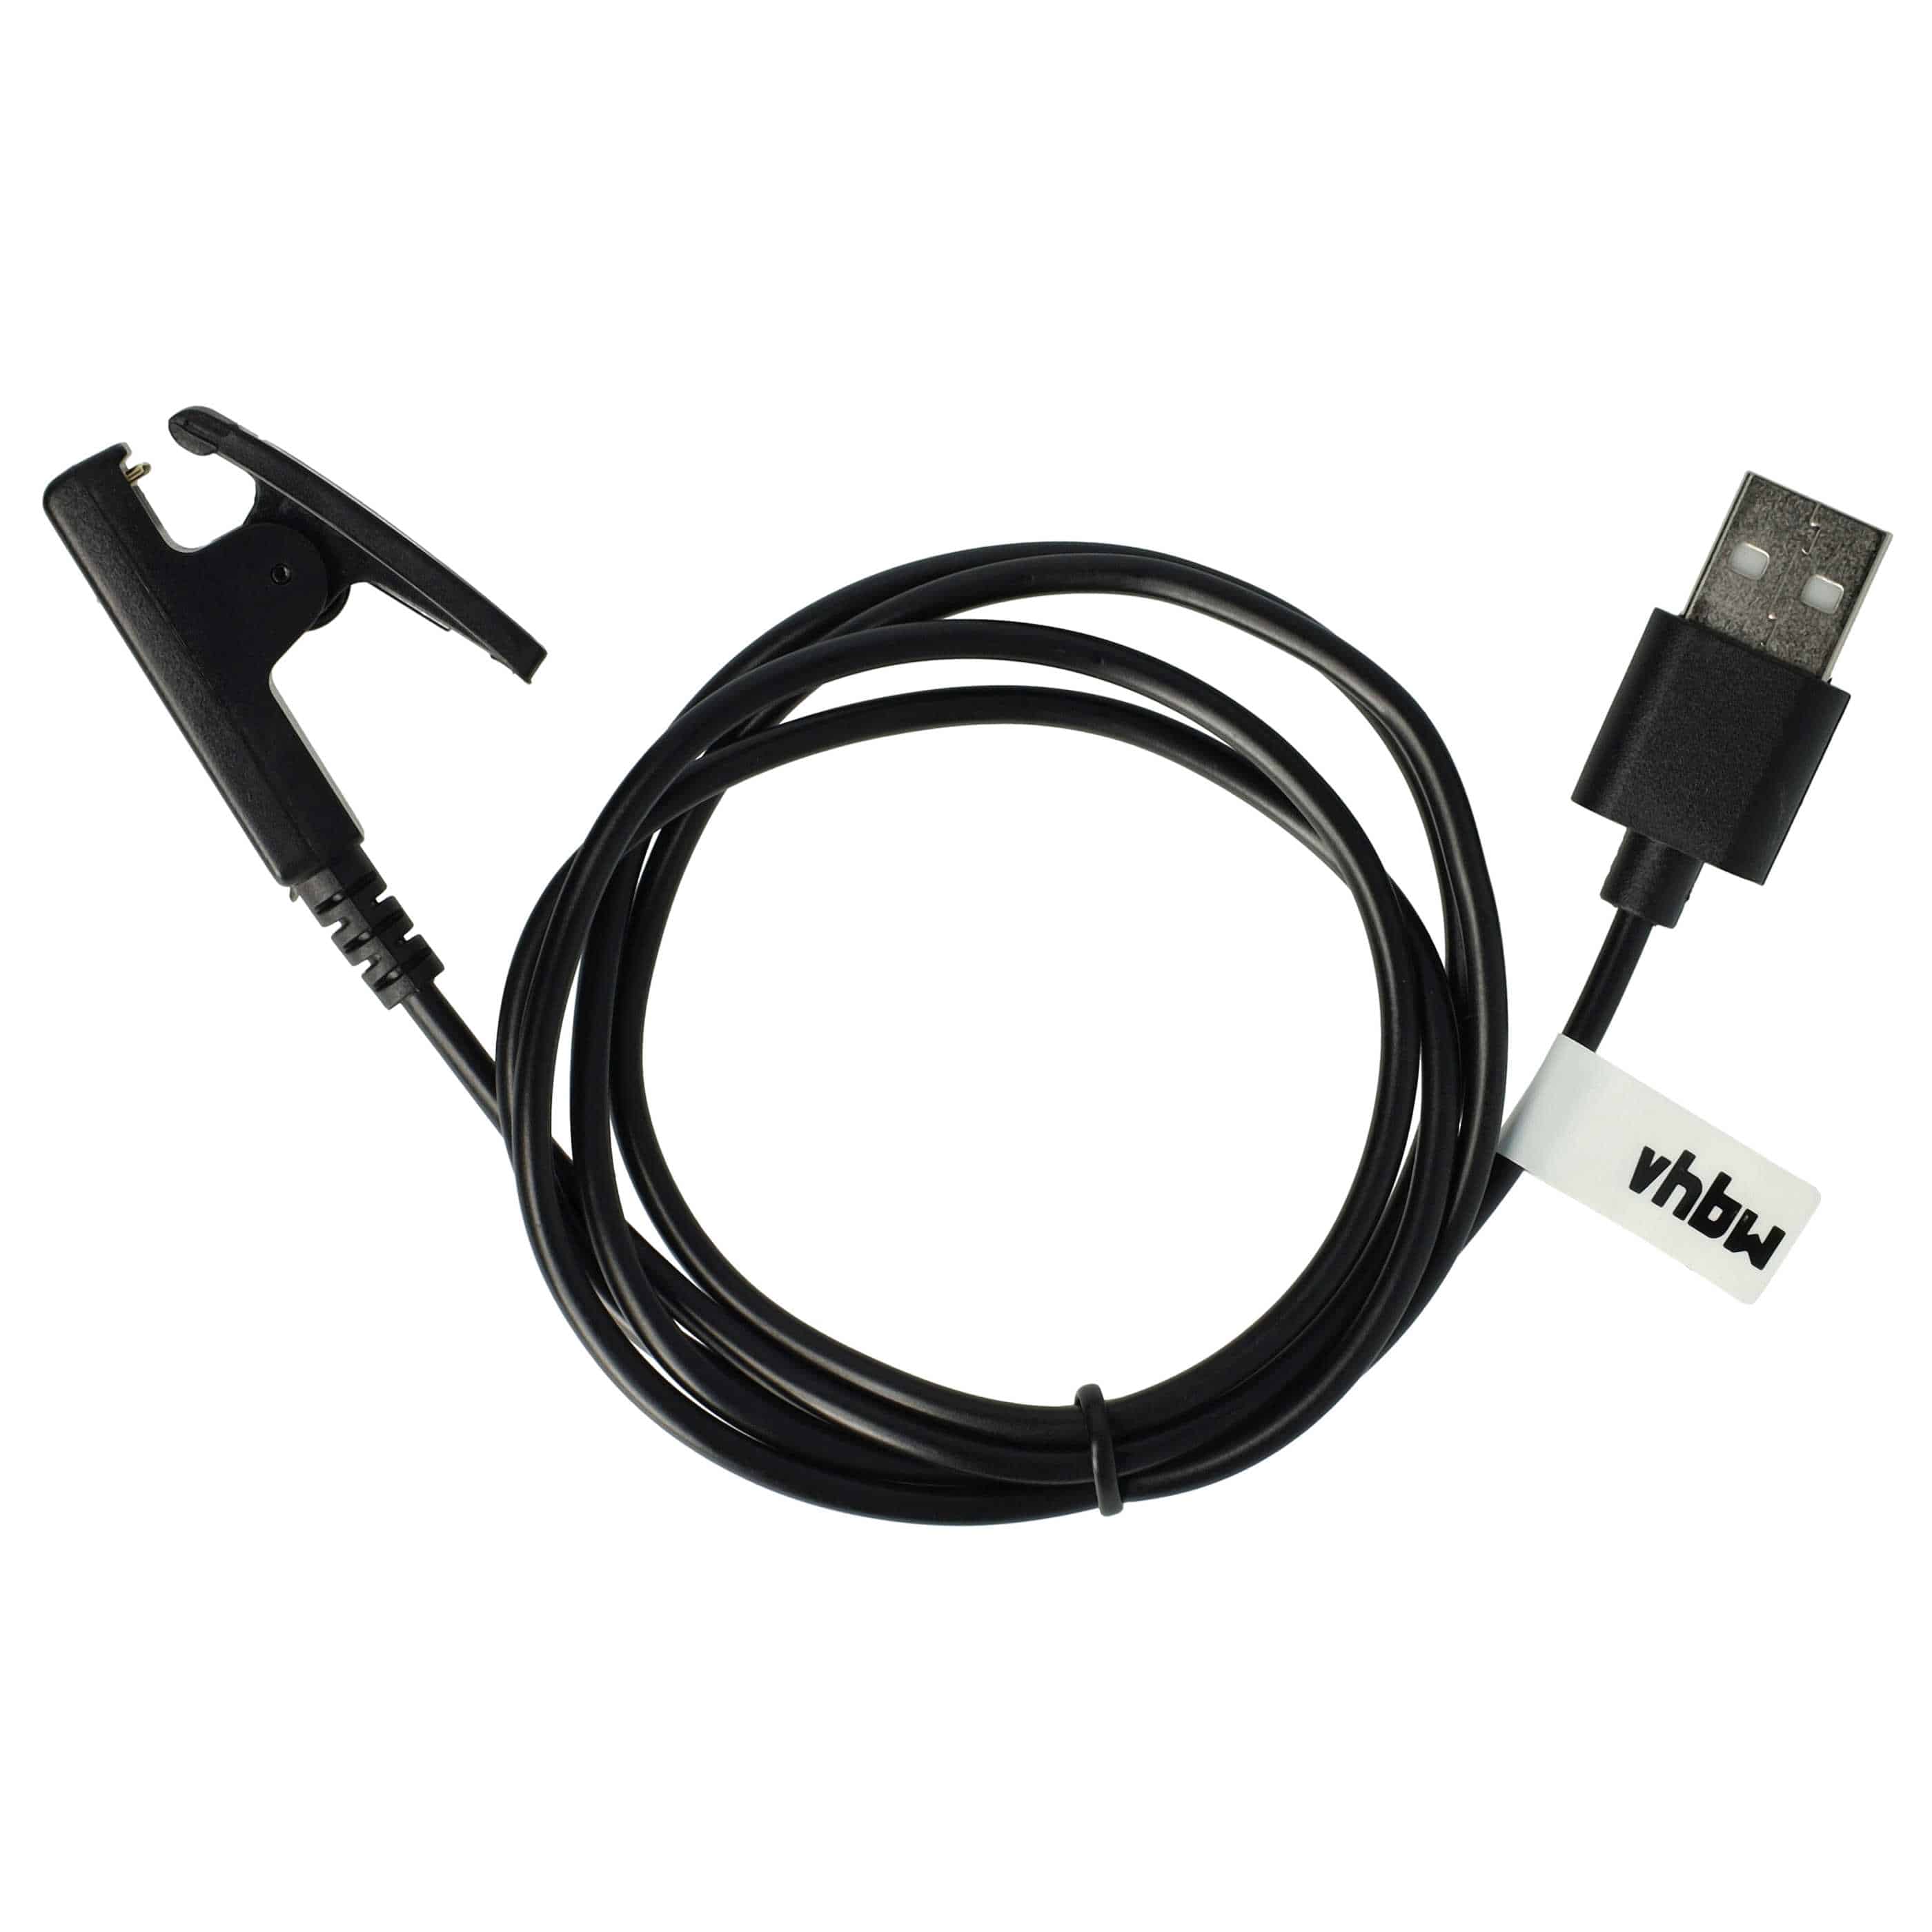 Charging Cable replaces Garmin 010-11029-19 for Garmin Fitness Tracker - Cable, 100cm, black